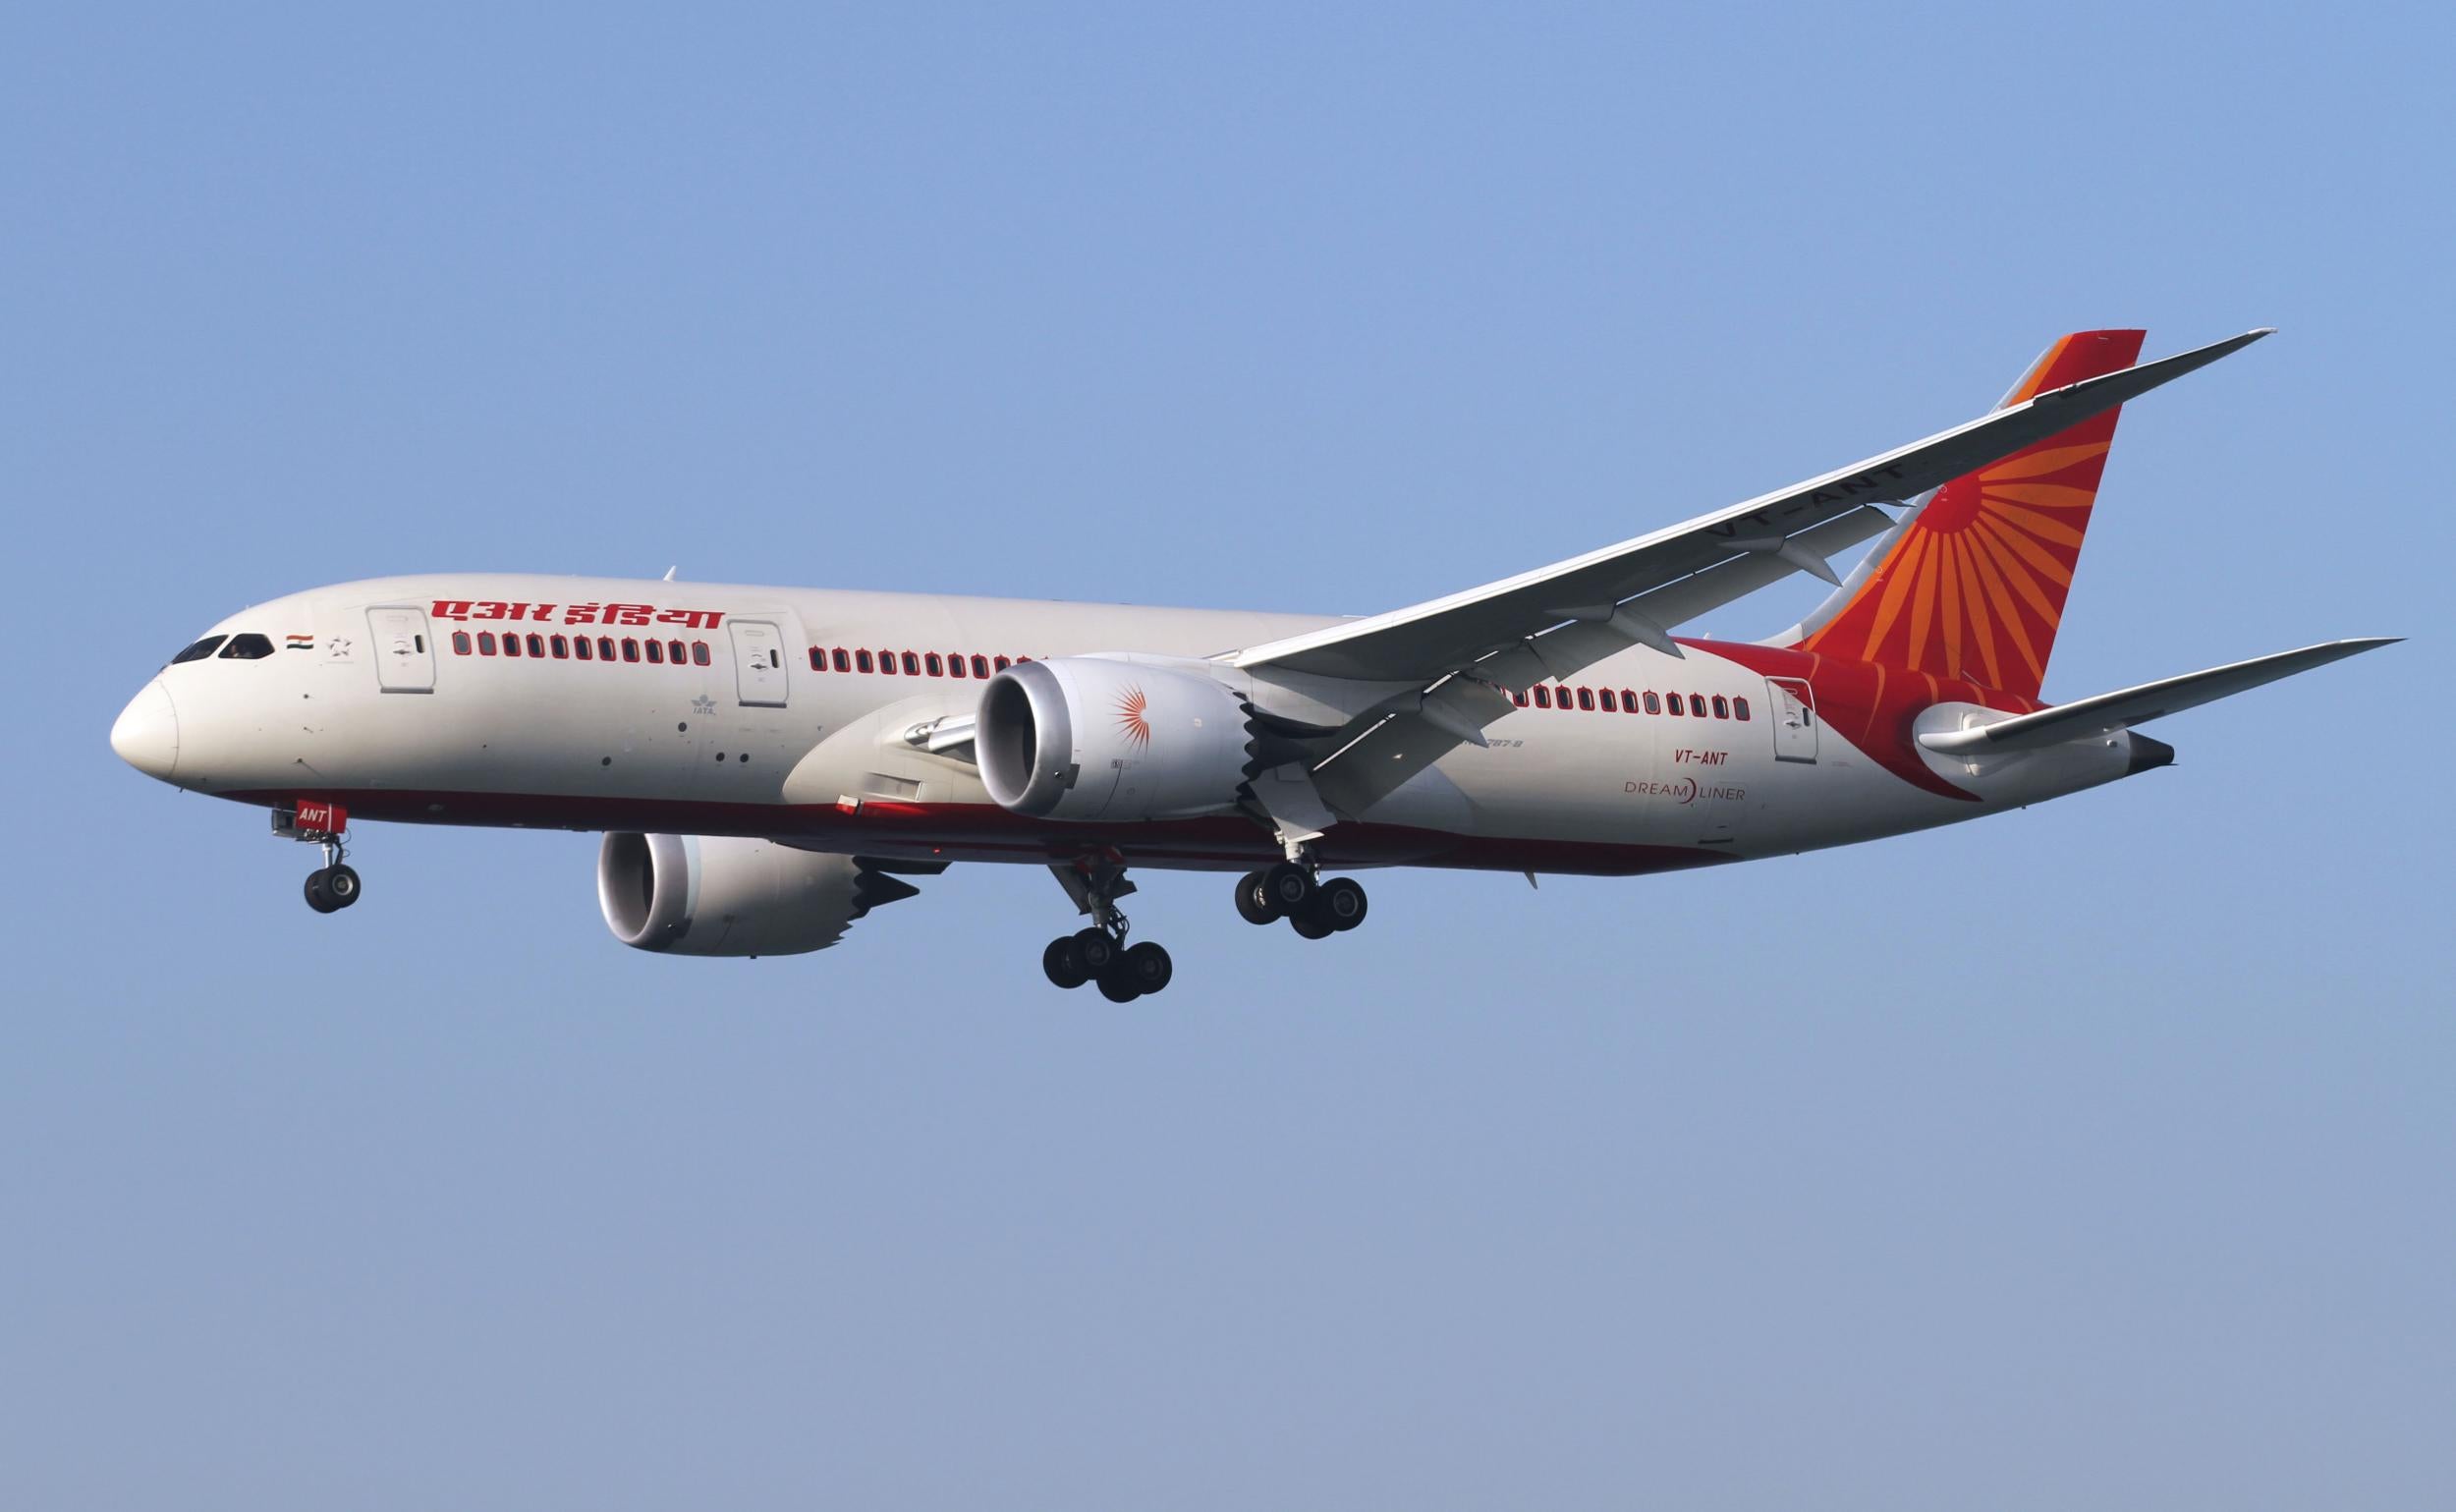 A Sikh Air India pilot was allegedly told to remove his turban at airport security